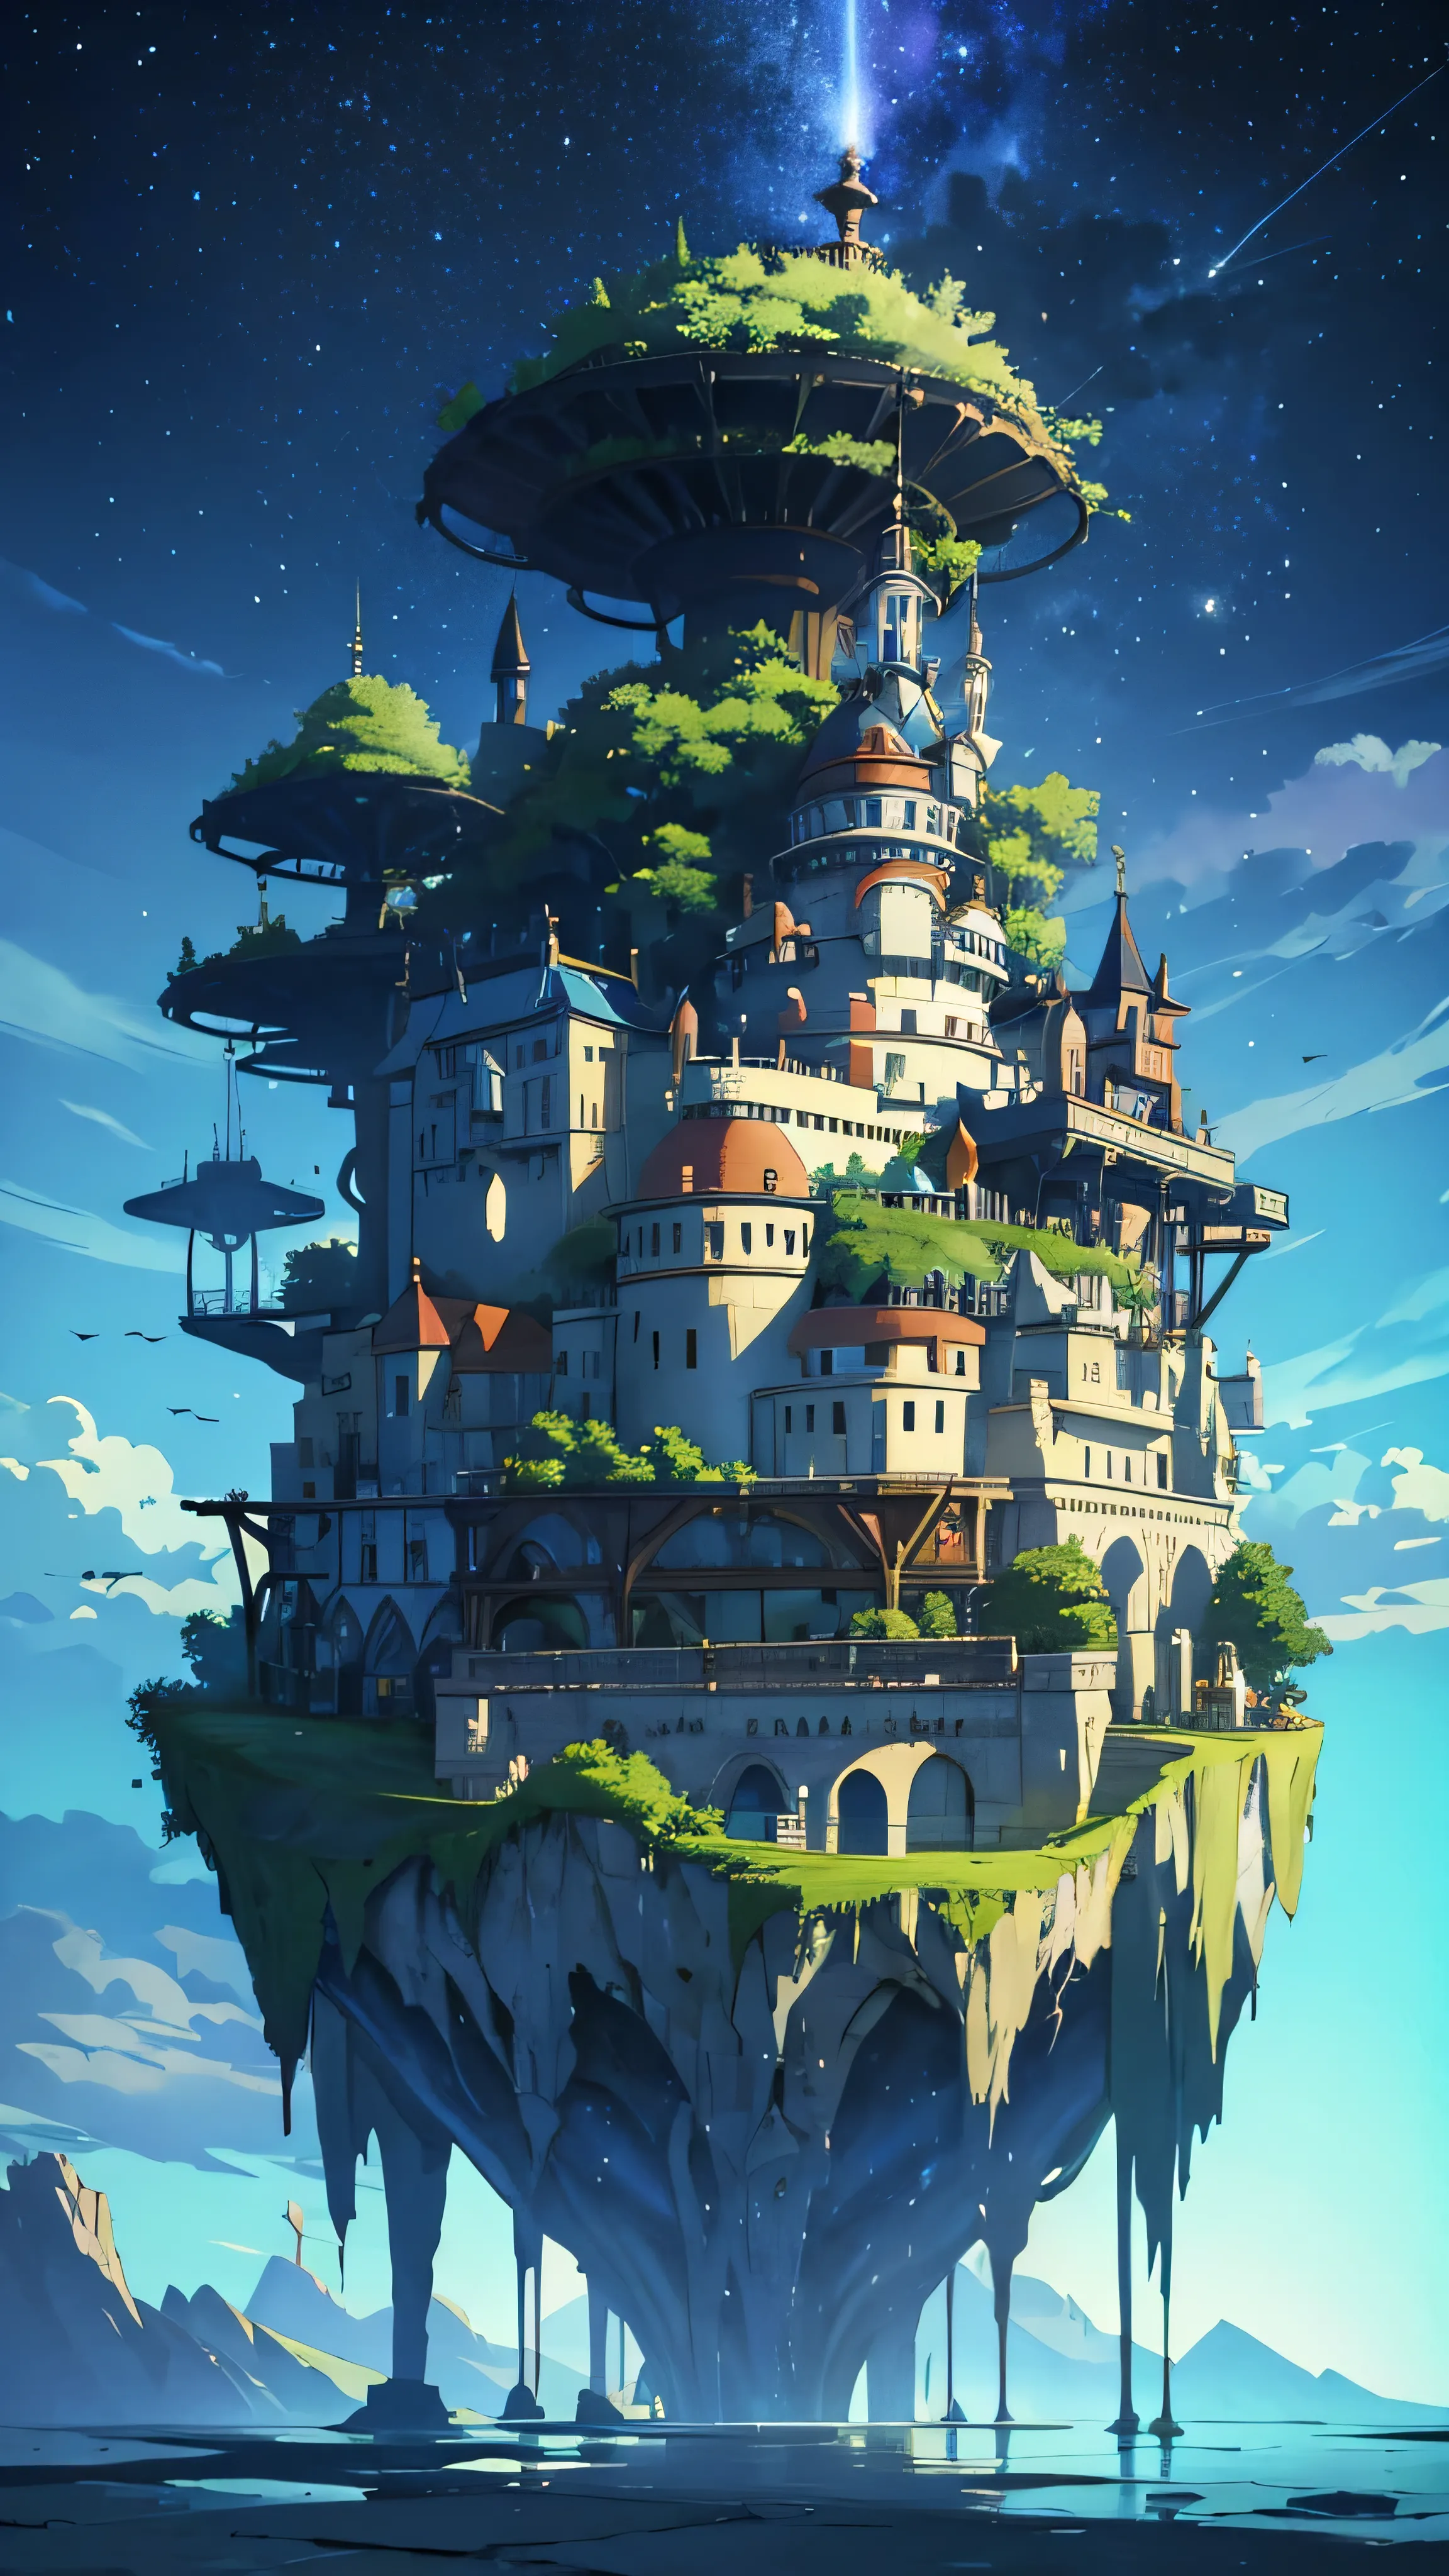 Stunning floating island、Futuristic and ominous、Floating in the air、A city that spreads across its surface、(cute)And cute elemen...